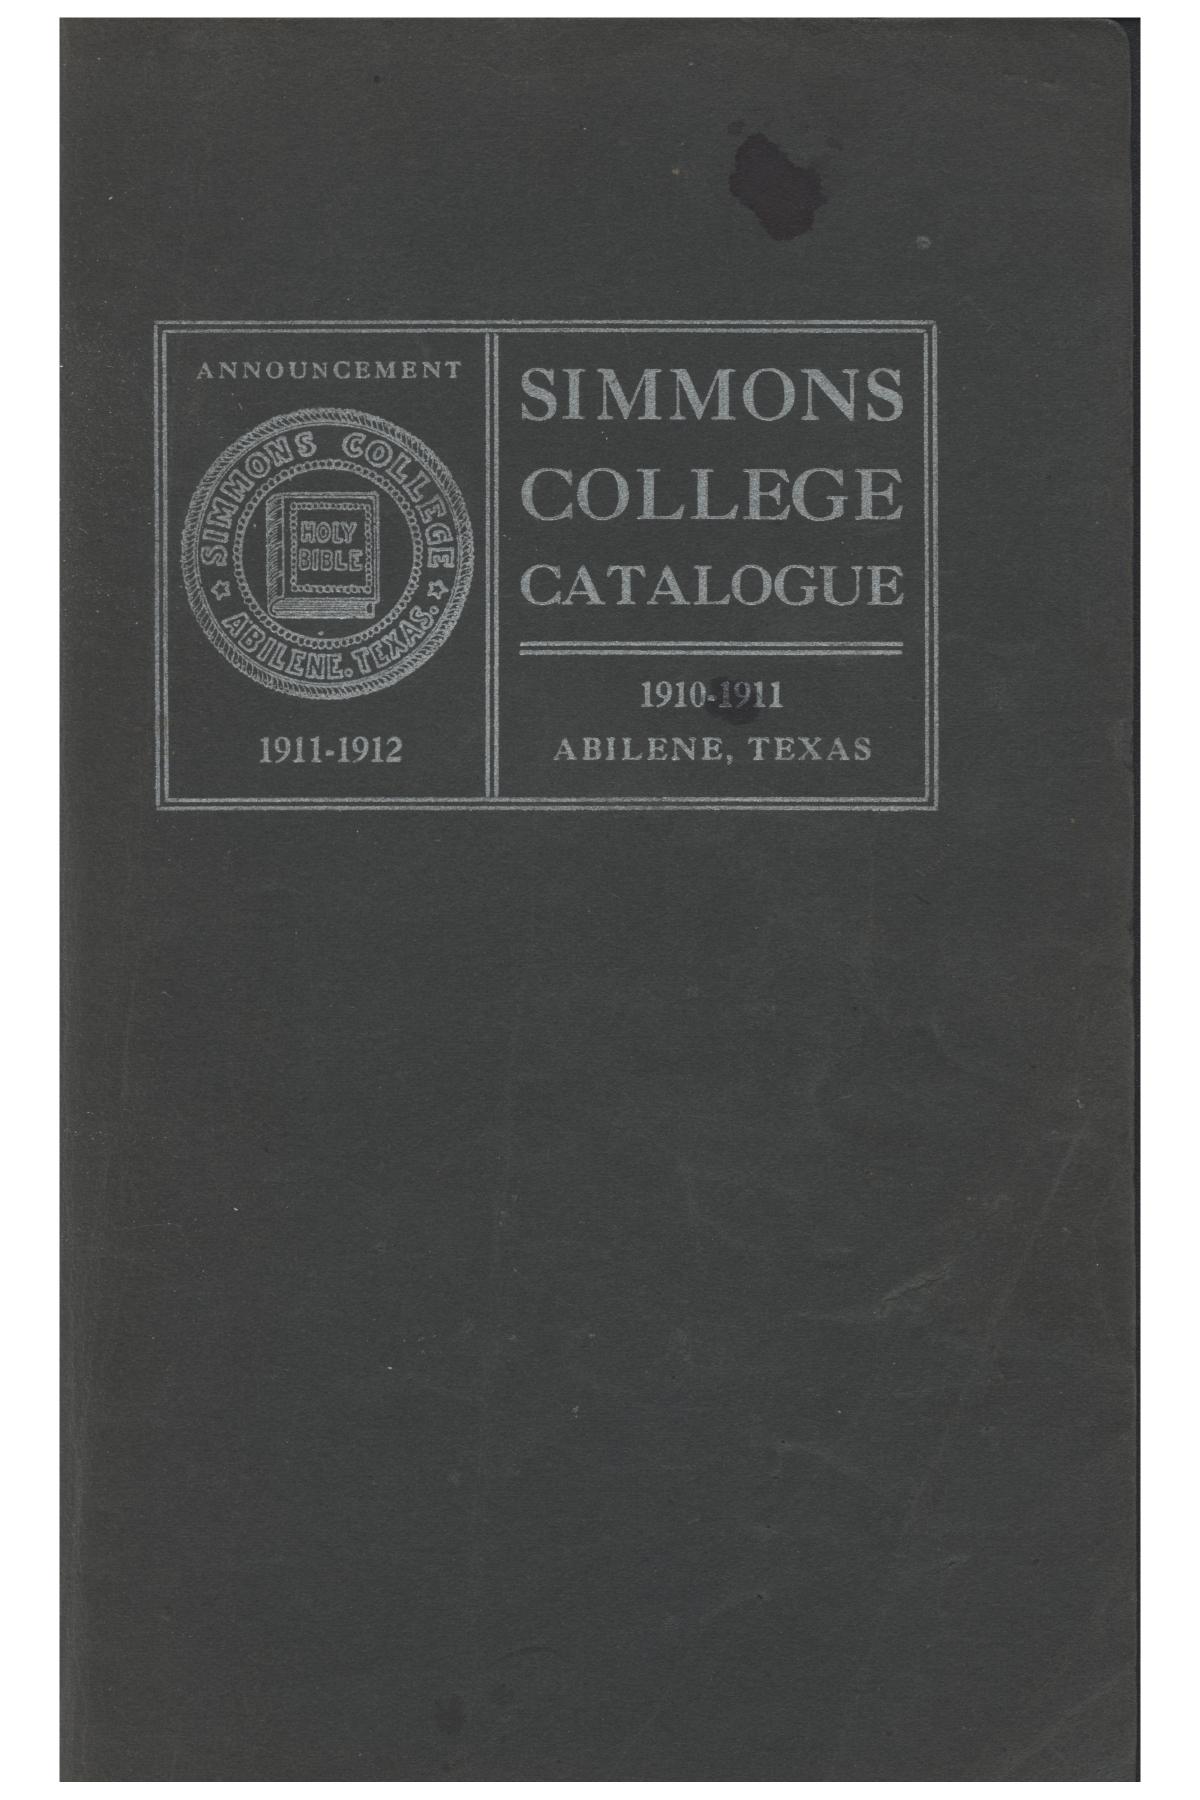 Catalogue of Simmons College, 1910-1911
                                                
                                                    Front Cover
                                                